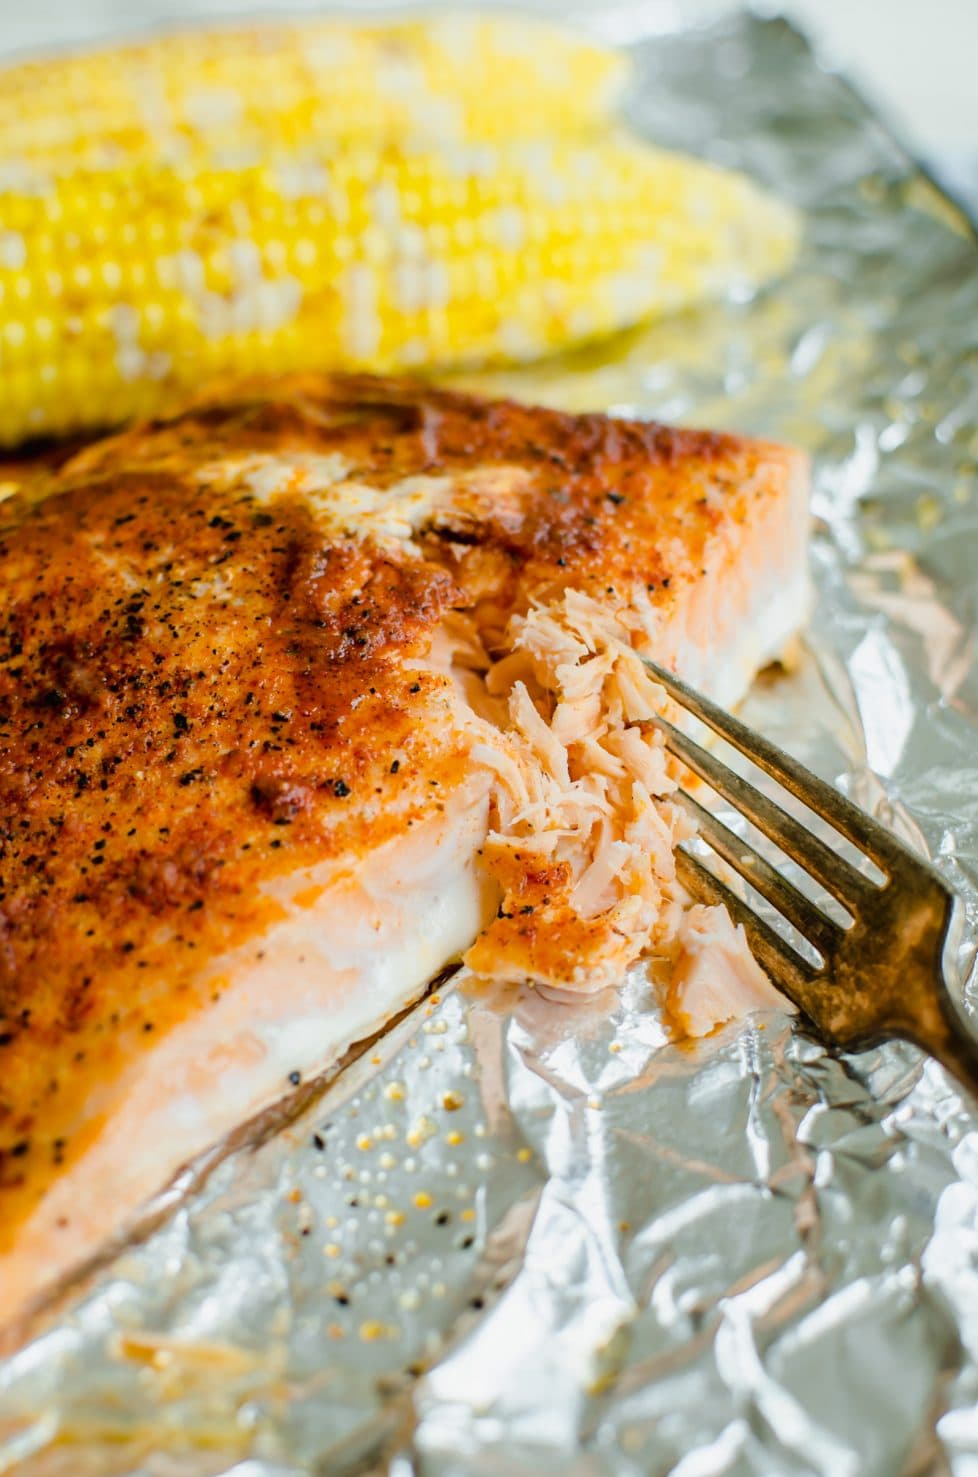 A piece of cooked BBQ salmon being flaked with a fork and a piece of roasted corn in the background.